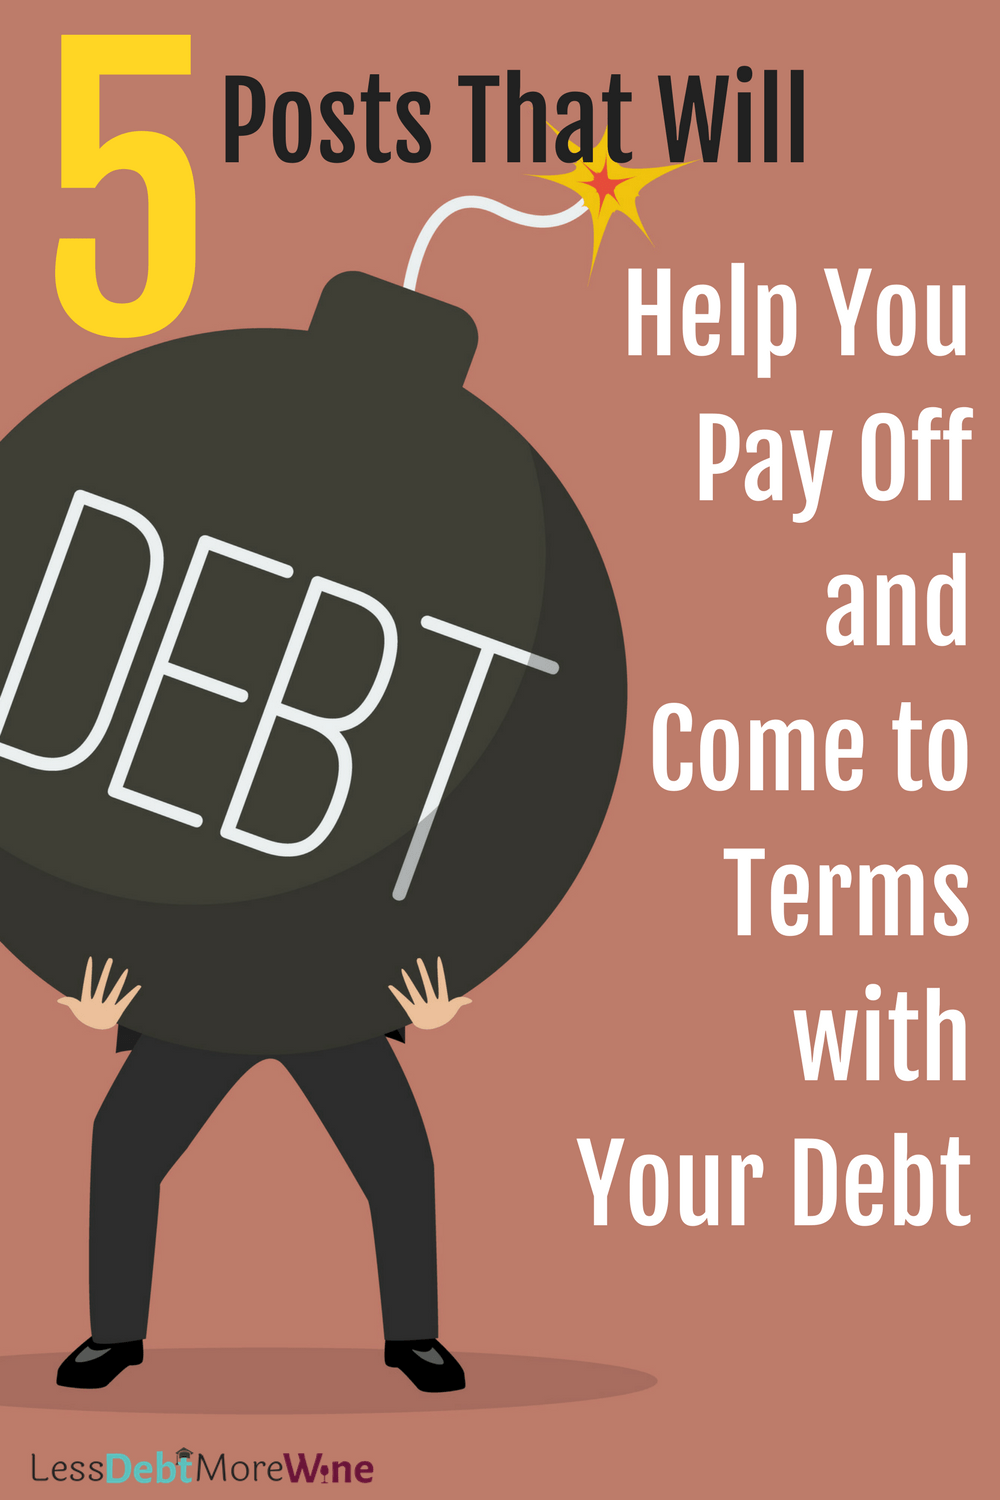 pay off your debt | pay off debt | debt repayment | student debt | student loans | credit card debt | how to pay off debt | debt payoff